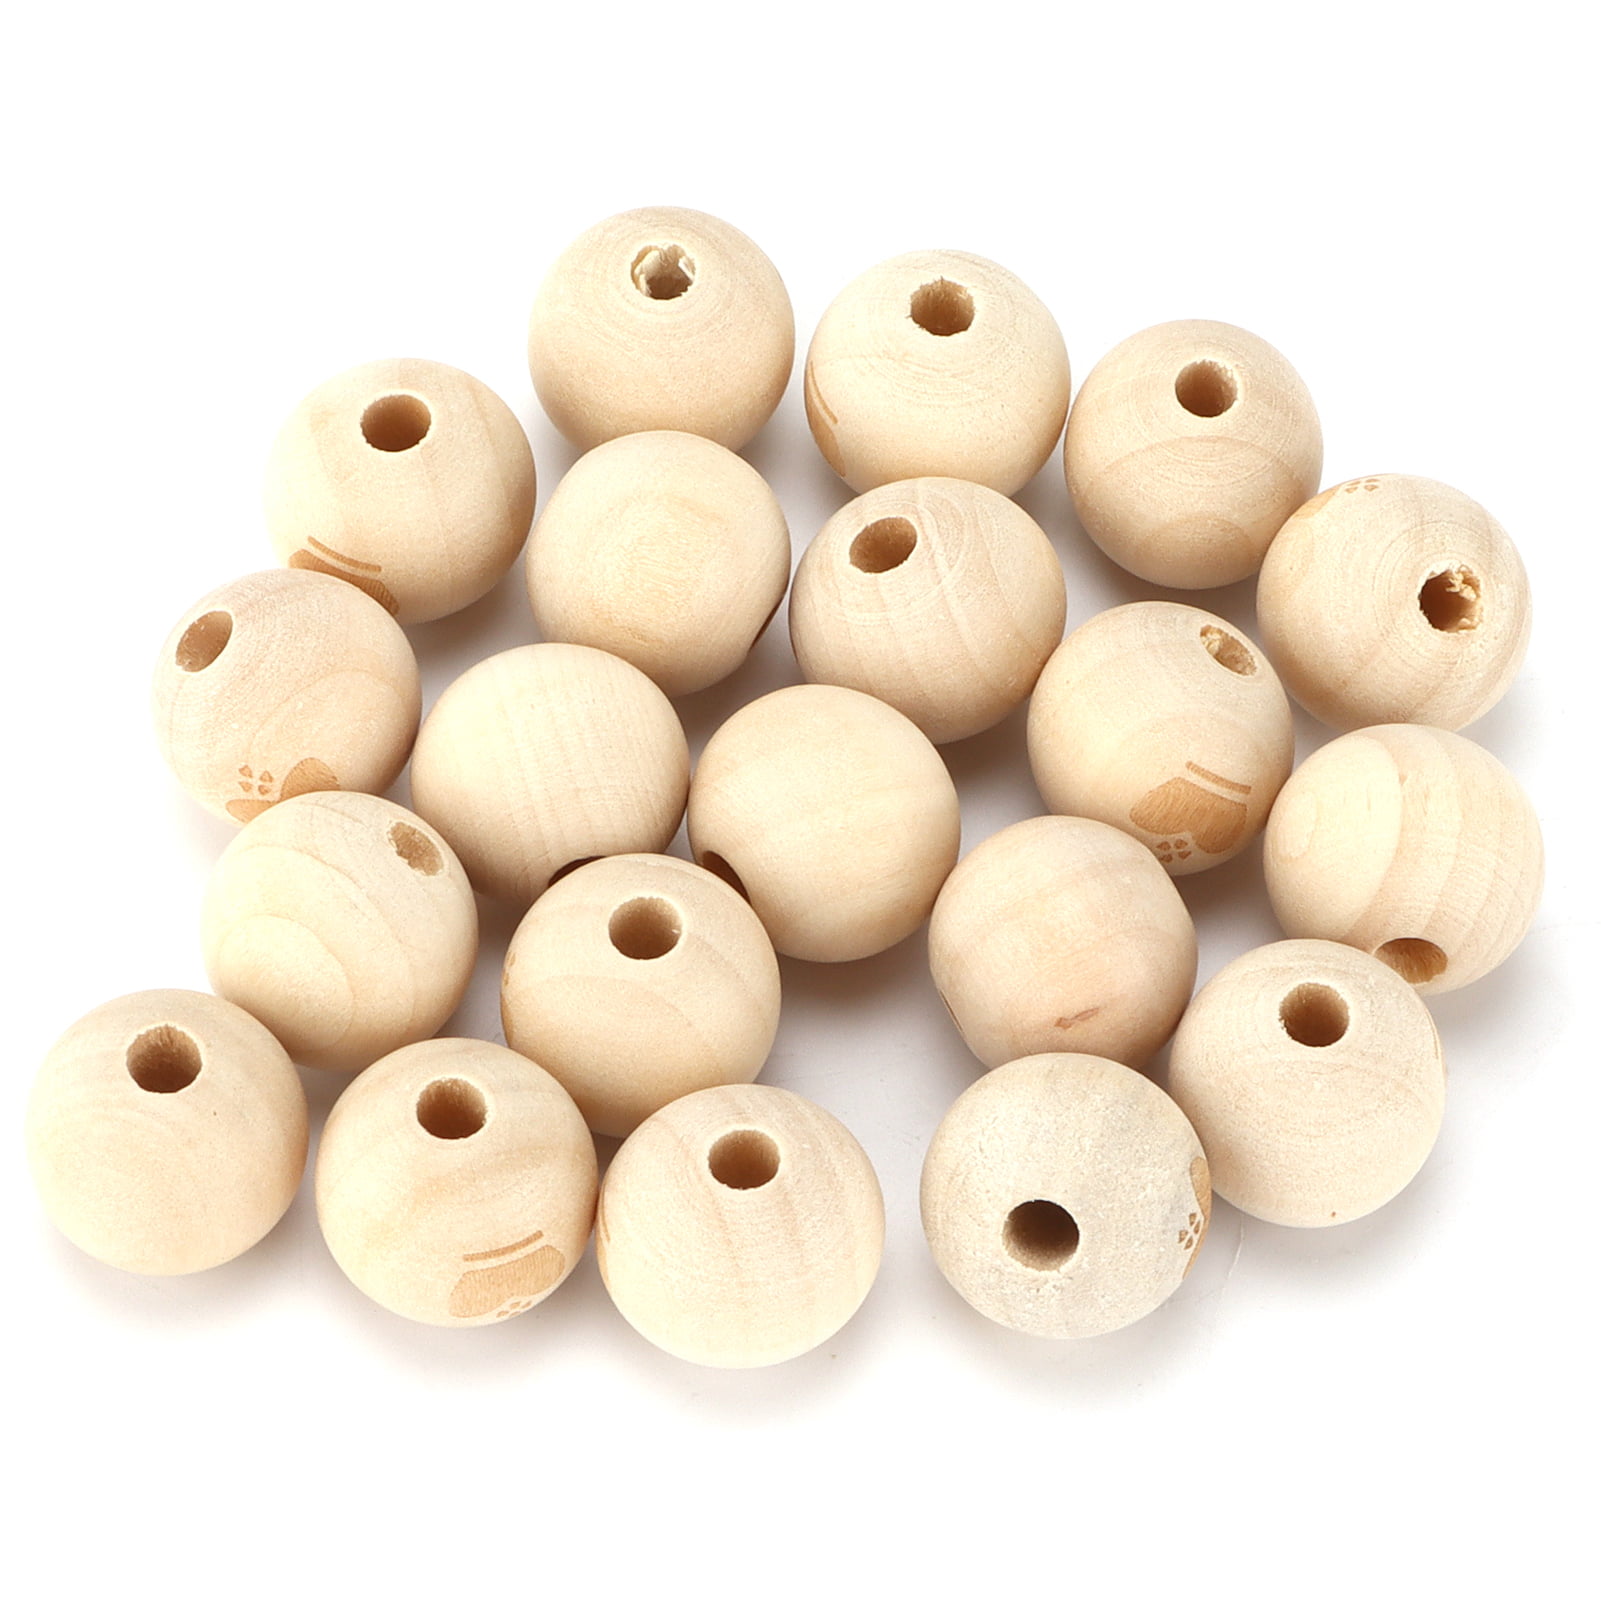 10x Flat Oval Wood Spacer Bead 30mm Natural Wooden Beads Macrame Necklace DIY 